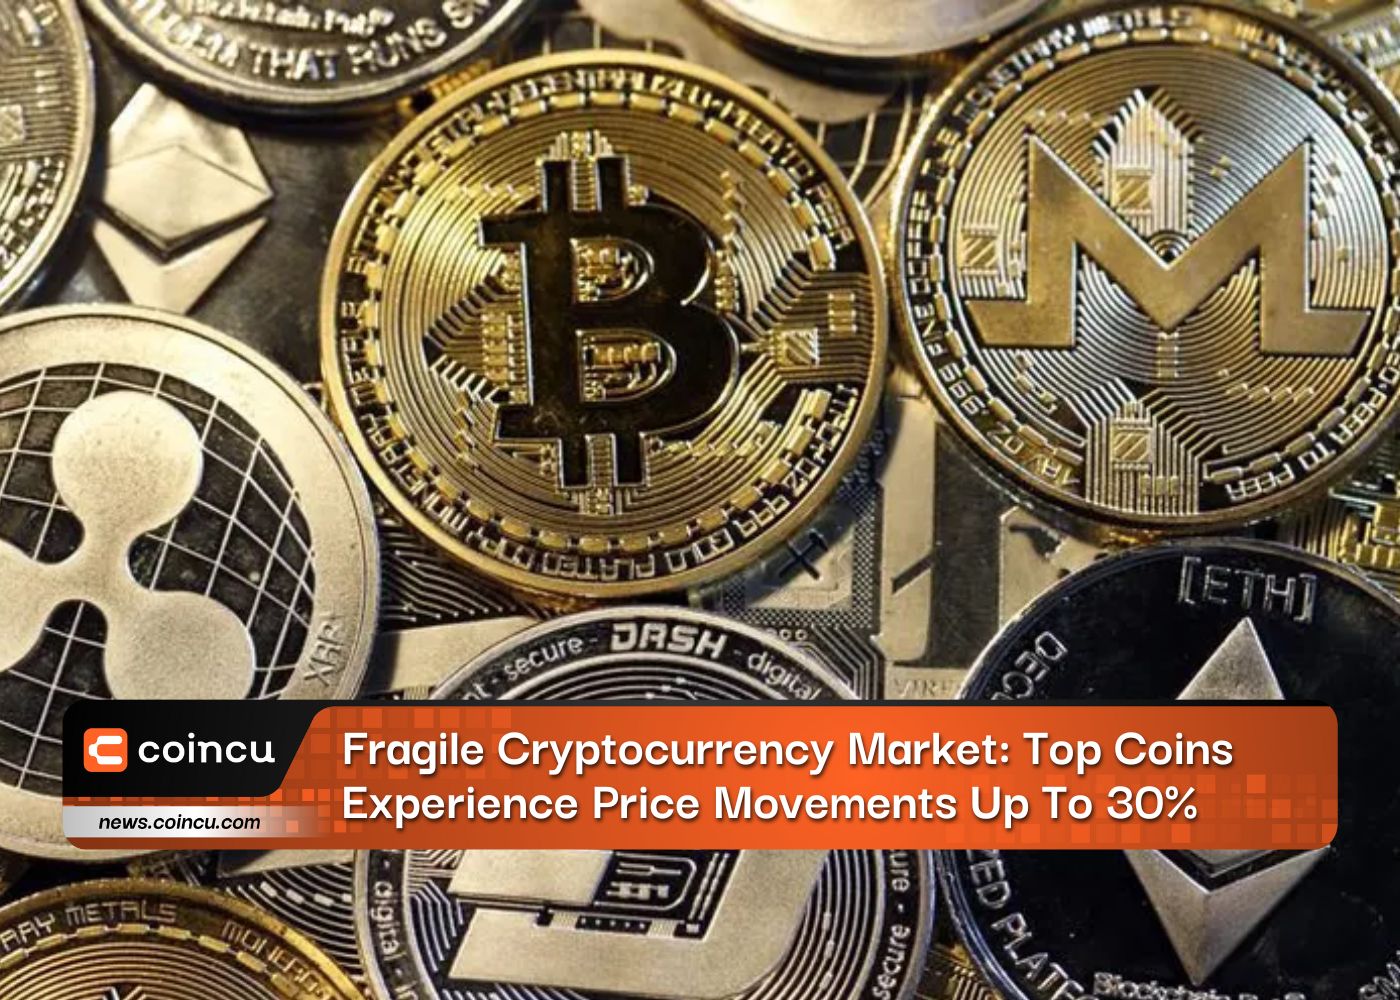 Fragile Cryptocurrency Market: Top Coins Experience Price Movements Up To 30%